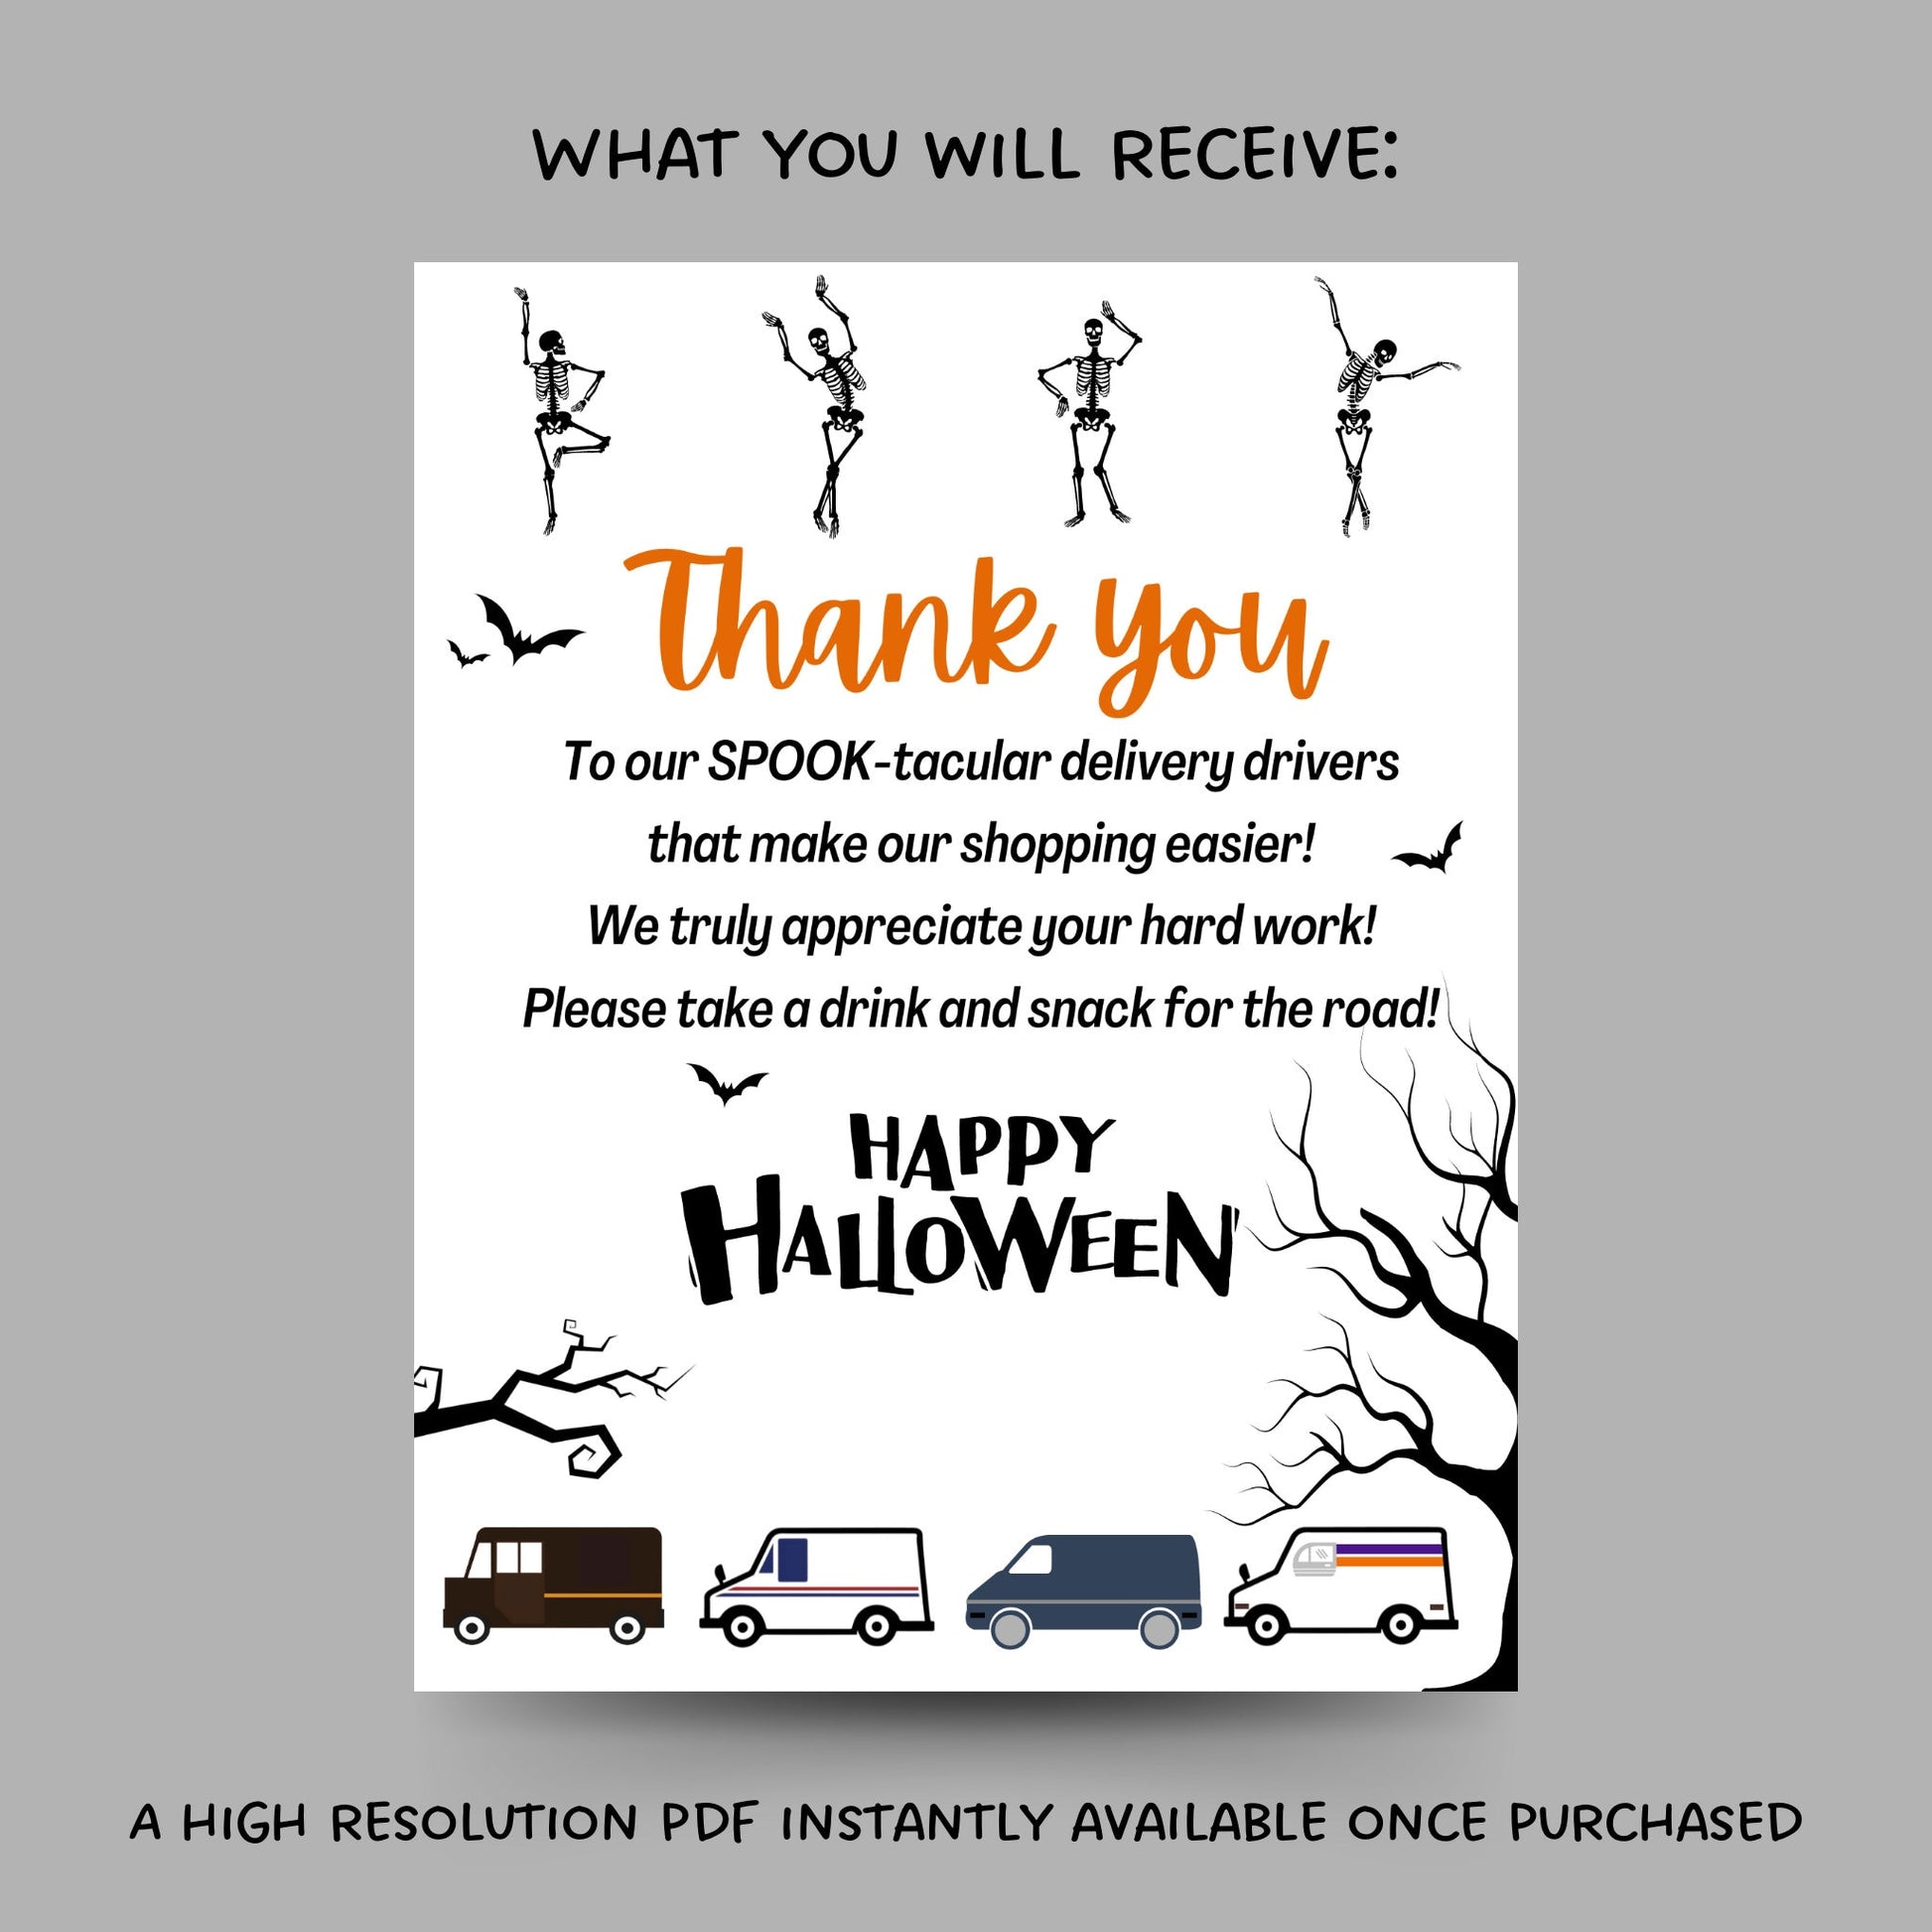 Thank You Snack & Drink Sign, Halloween Delivery Driver Appreciation Sign, Mail Carrier Treat Basket Printable Sign, Essential Worker Sign